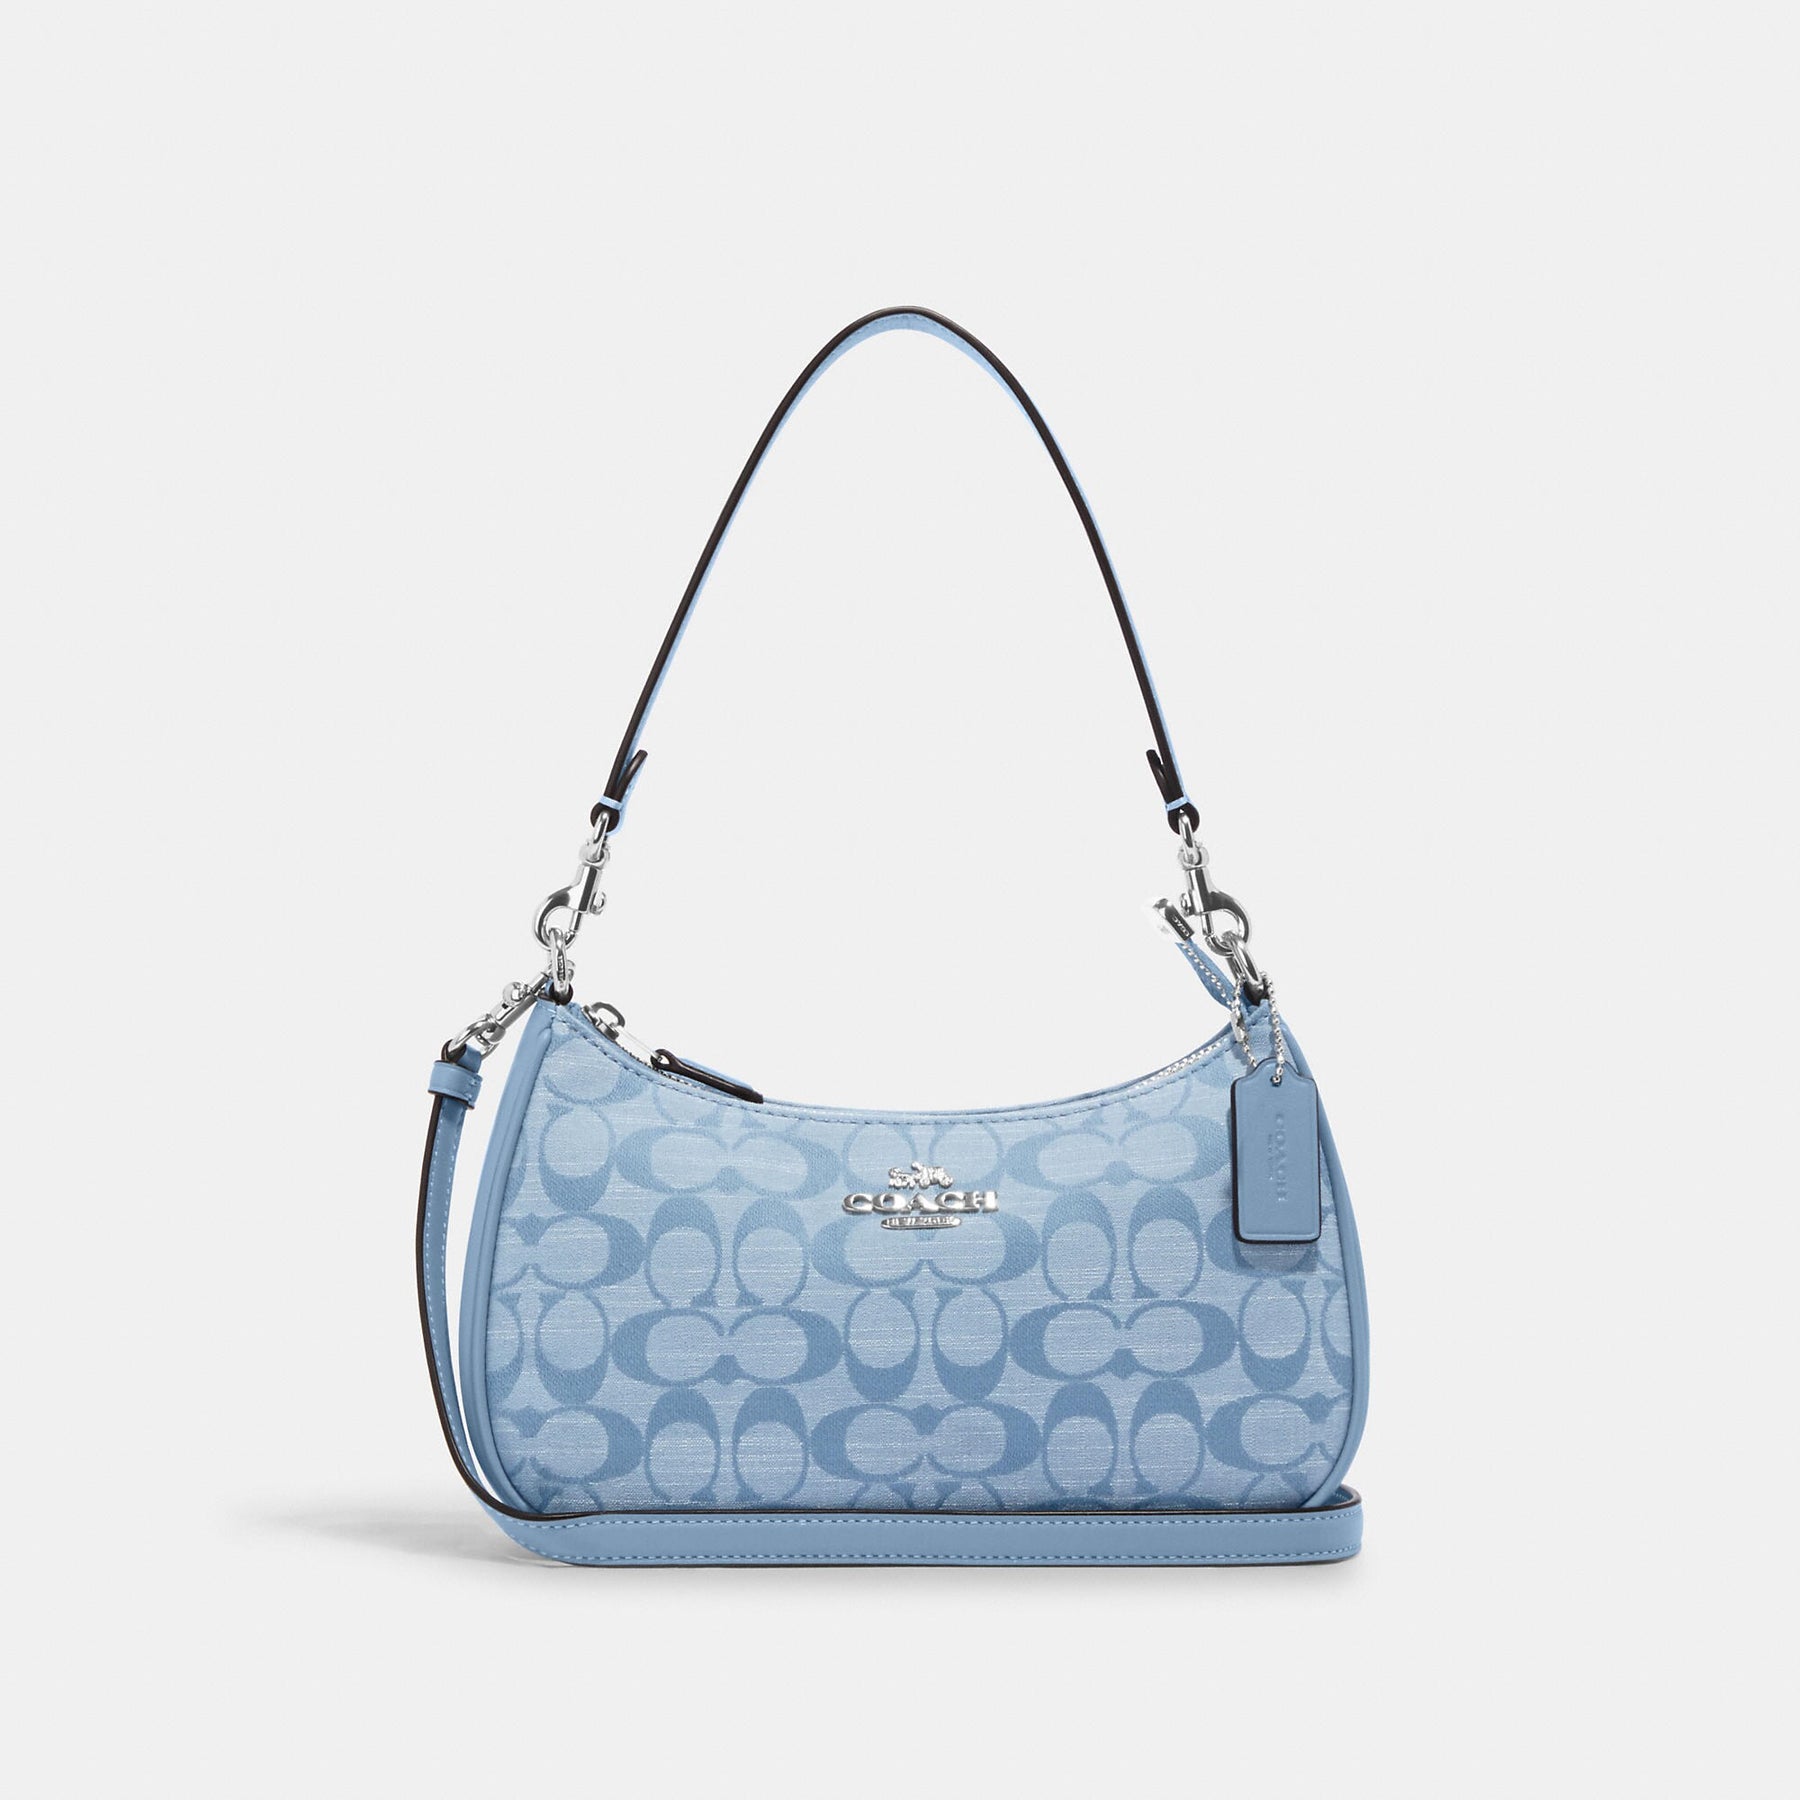 Coach Outlet takes an extra 15% off its bestselling styles